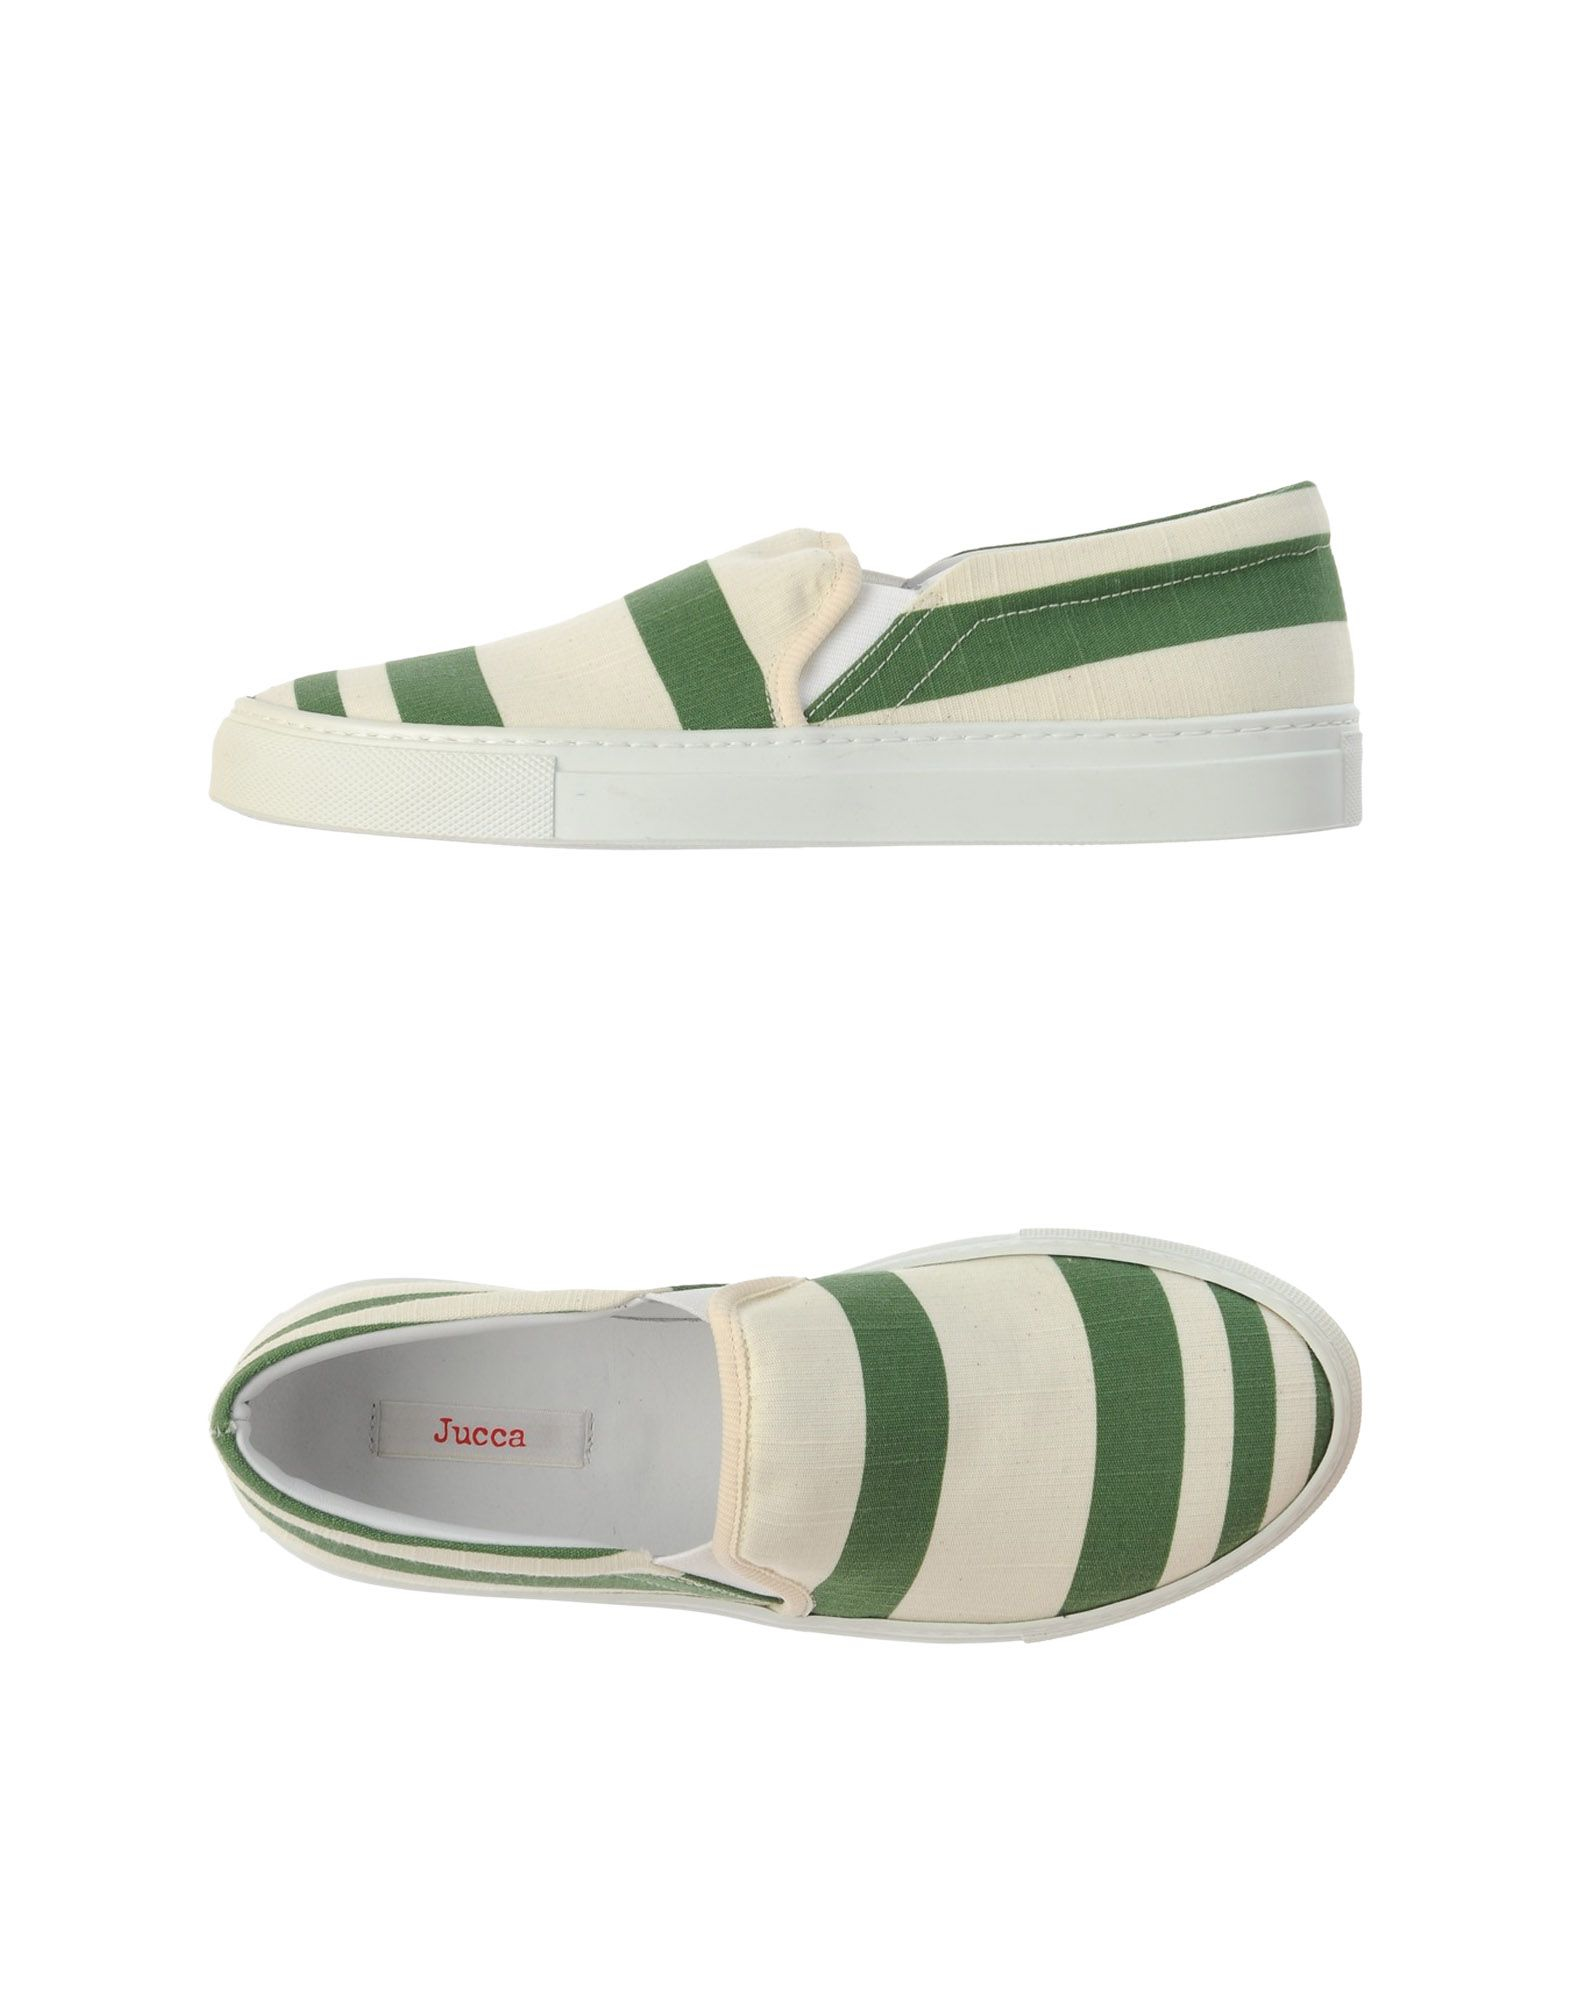 Jucca Low-tops & Trainers in Green | Lyst